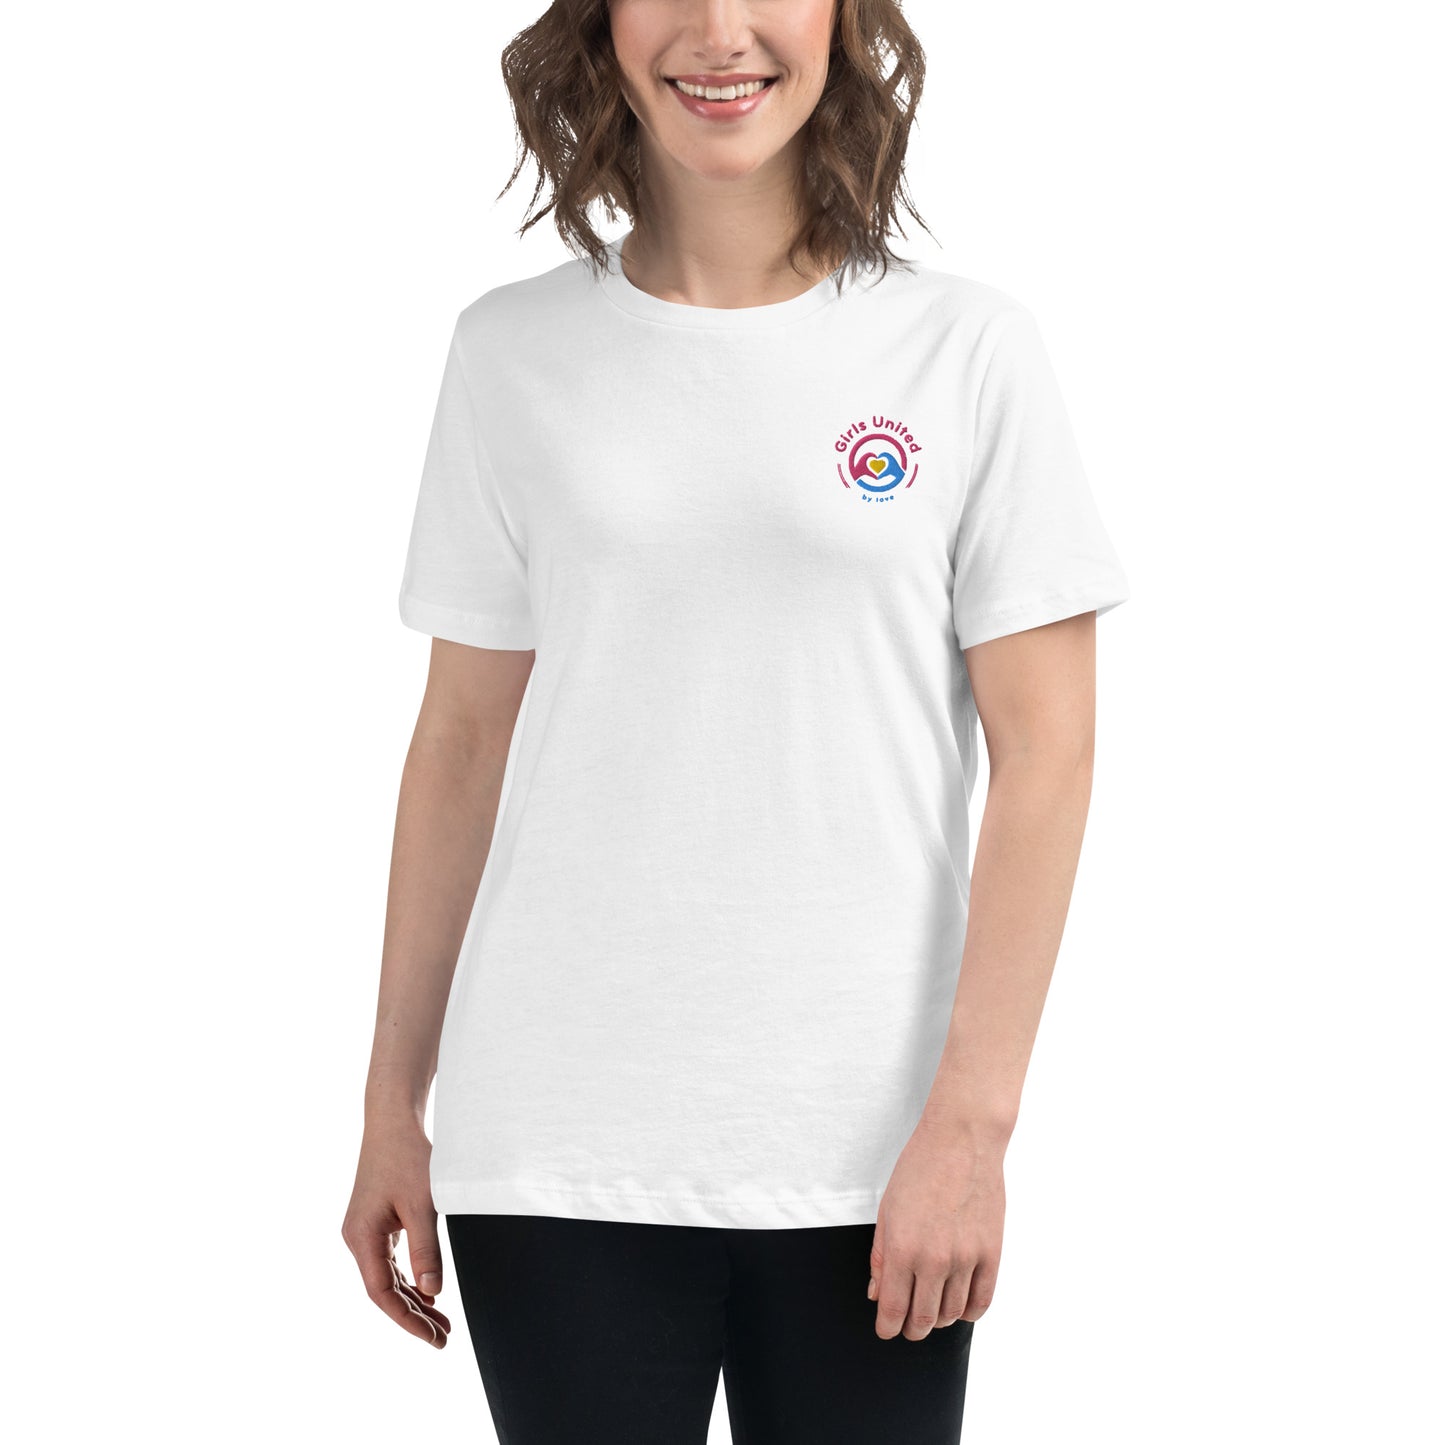 Girls United by Love Logo Women's Relaxed T-Shirt